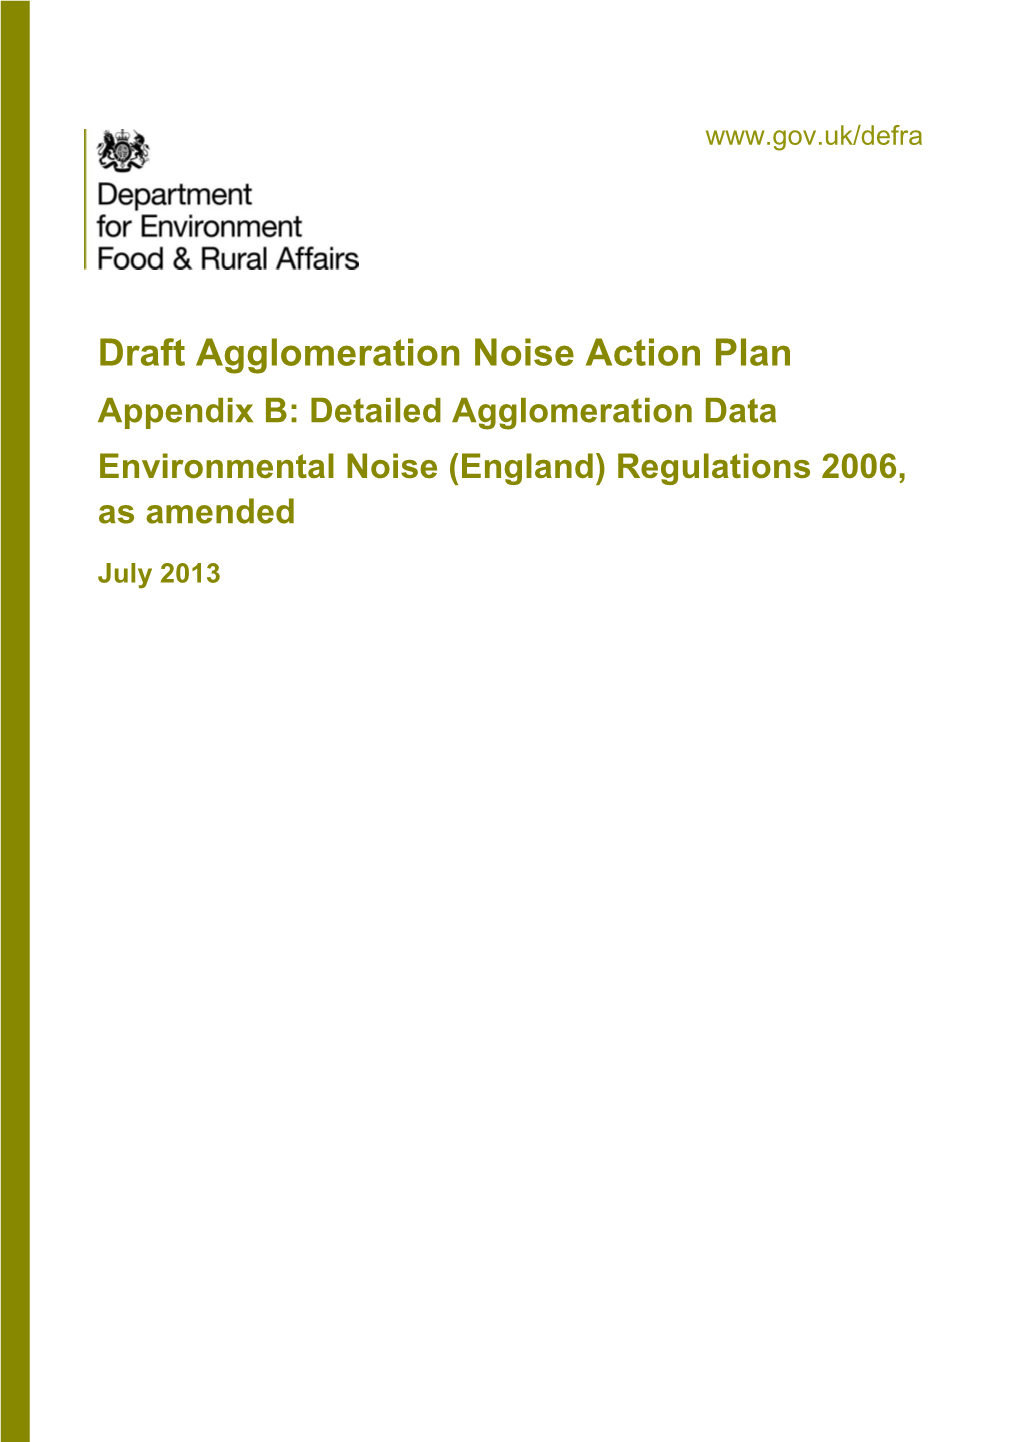 Draft Agglomeration Noise Action Plan Appendix B: Detailed Agglomeration Data Environmental Noise (England) Regulations 2006, As Amended